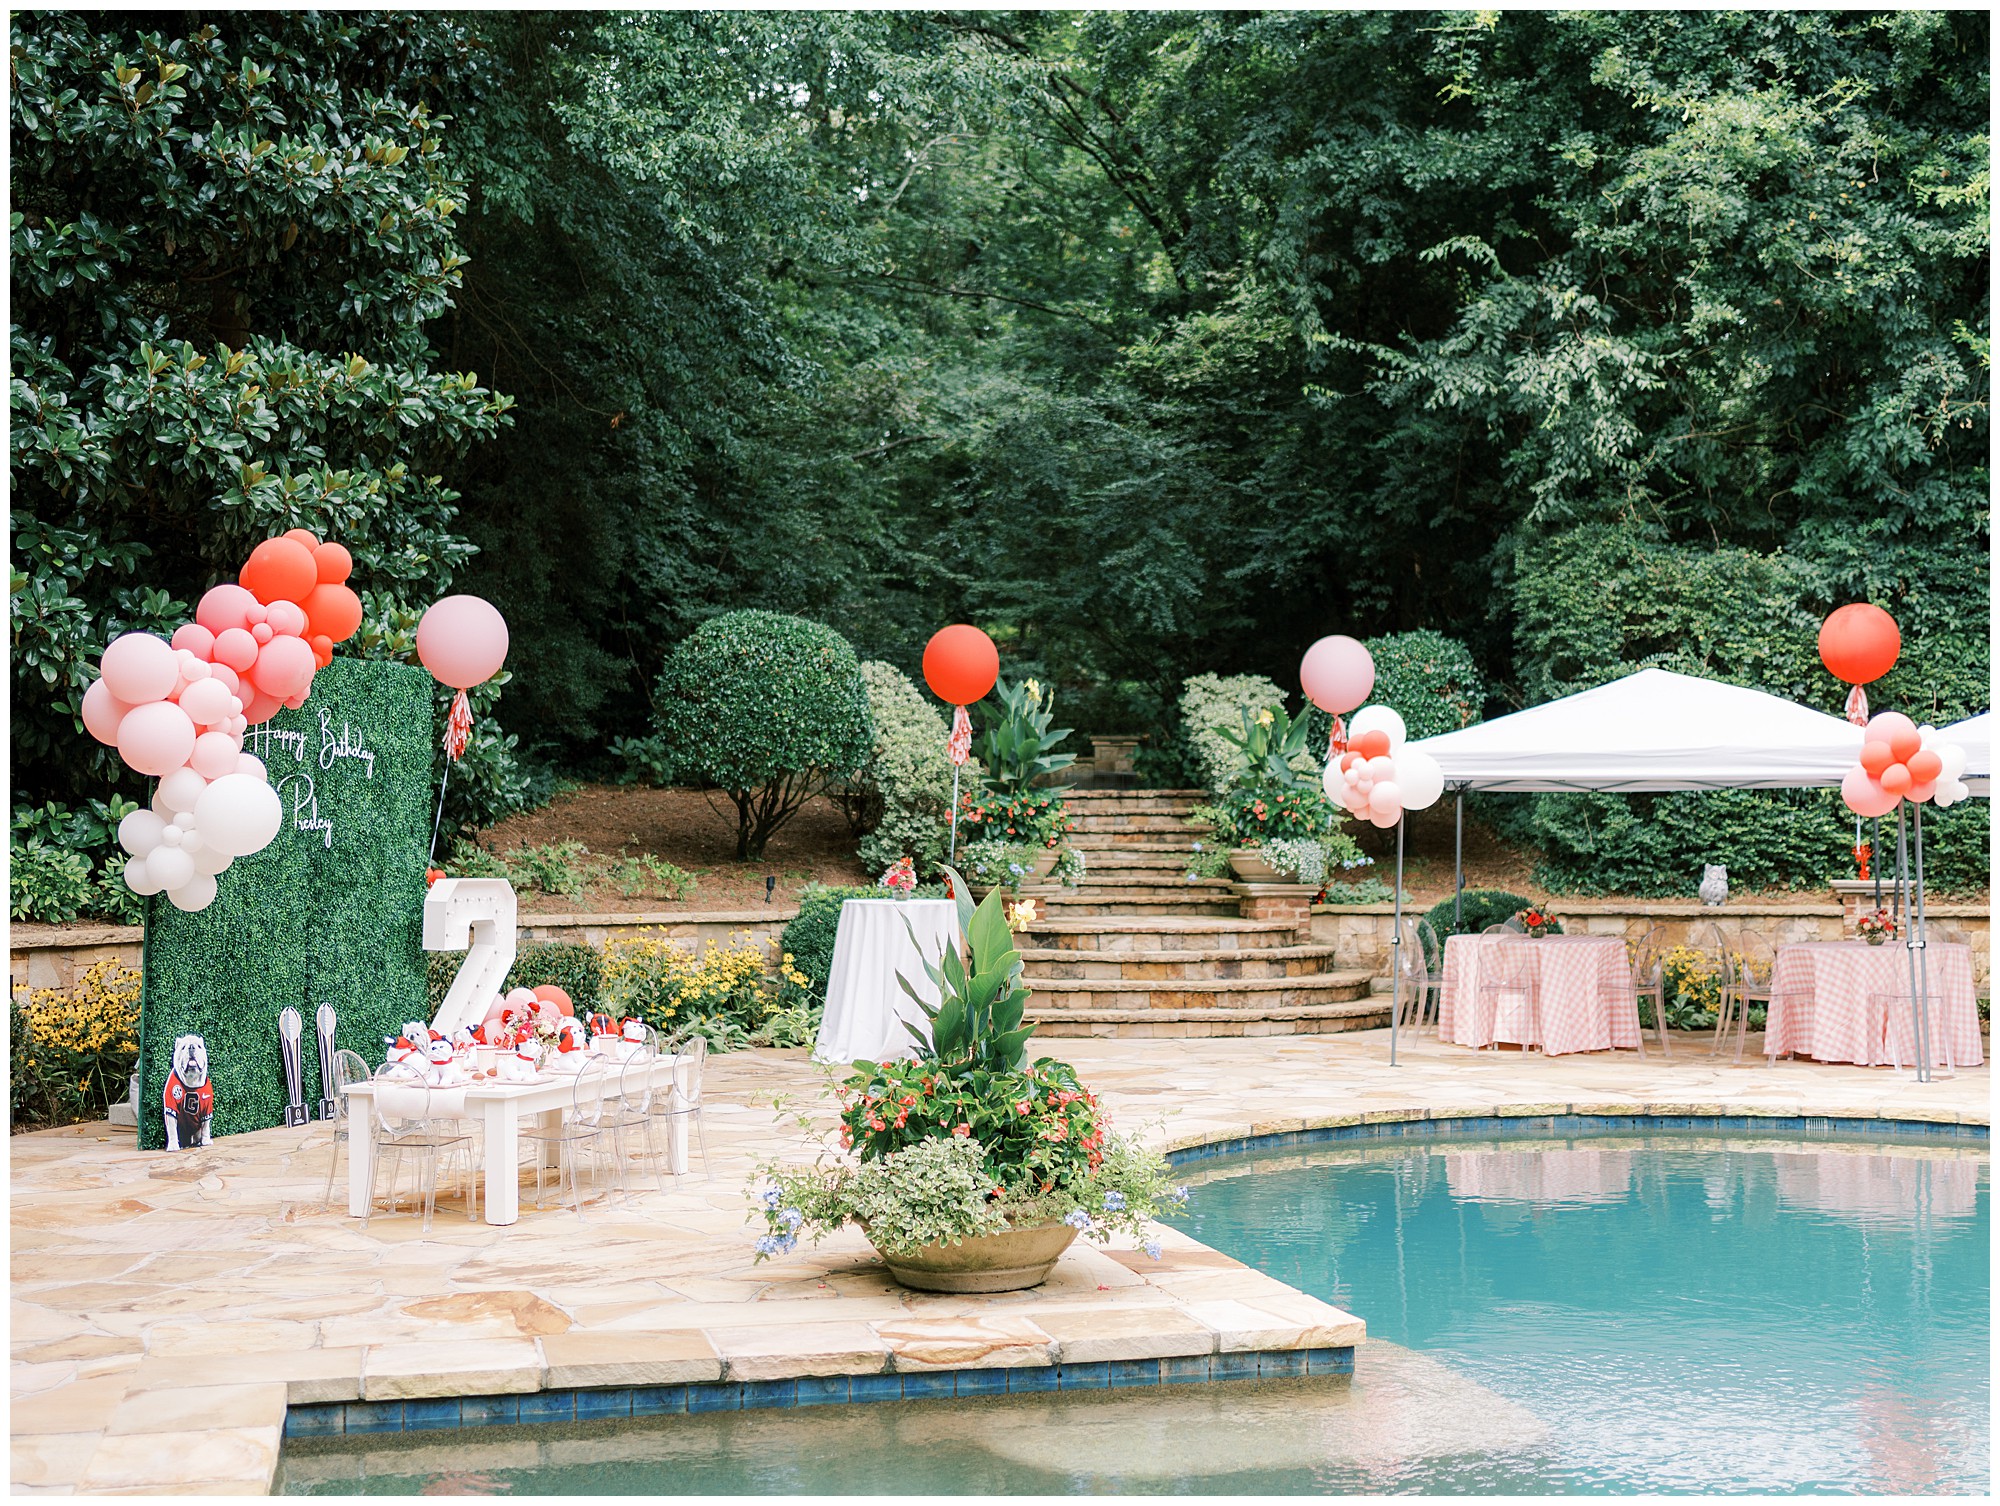 Landscape view of a pool and backyard decorated for a two year old's UGA themed birthday party.